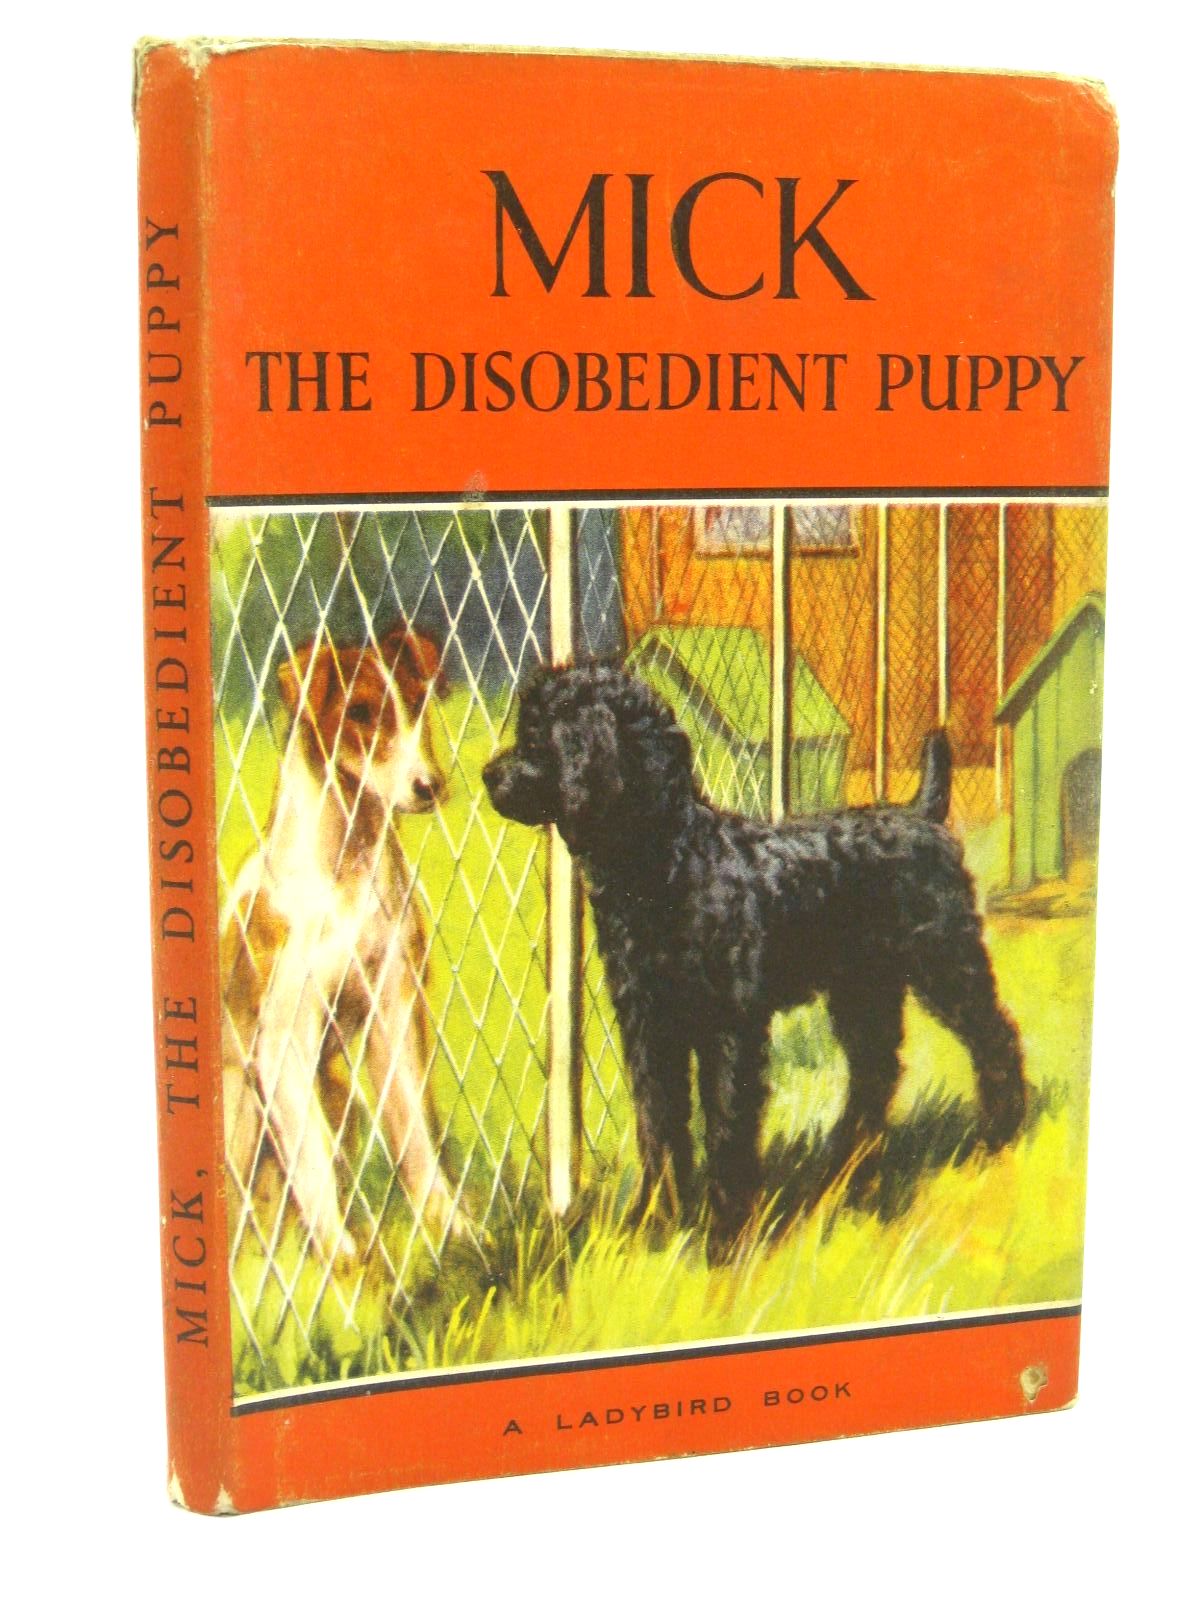 Photo of MICK THE DISOBEDIENT PUPPY written by Barr, Noel illustrated by Hickling, P.B. published by Wills & Hepworth Ltd. (STOCK CODE: 1316804)  for sale by Stella & Rose's Books